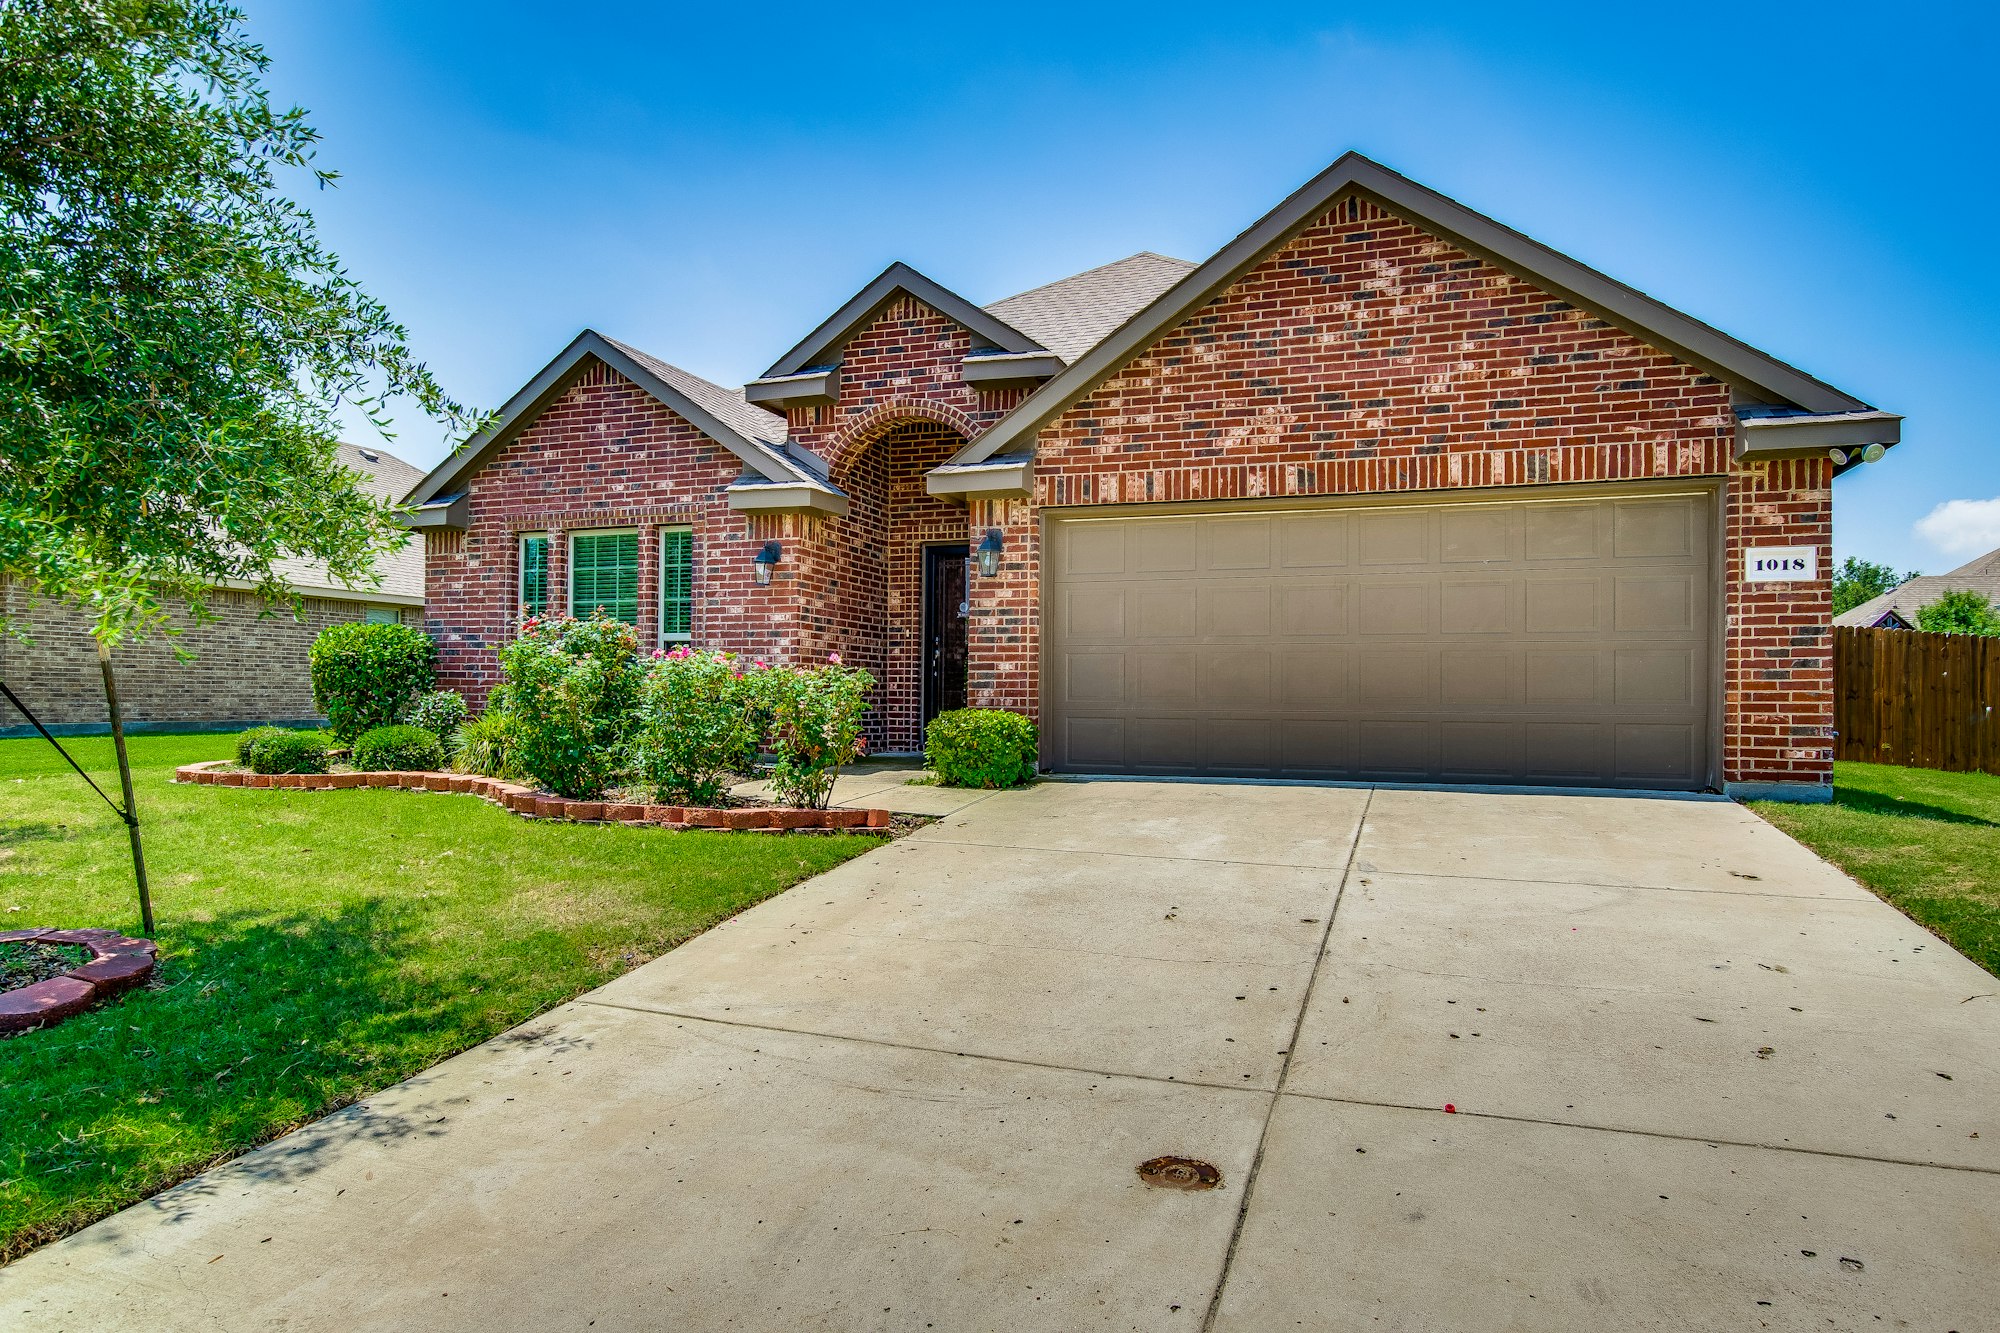 Photo 1 of 27 - 1018 White Porch Ave, Forney, TX 75126